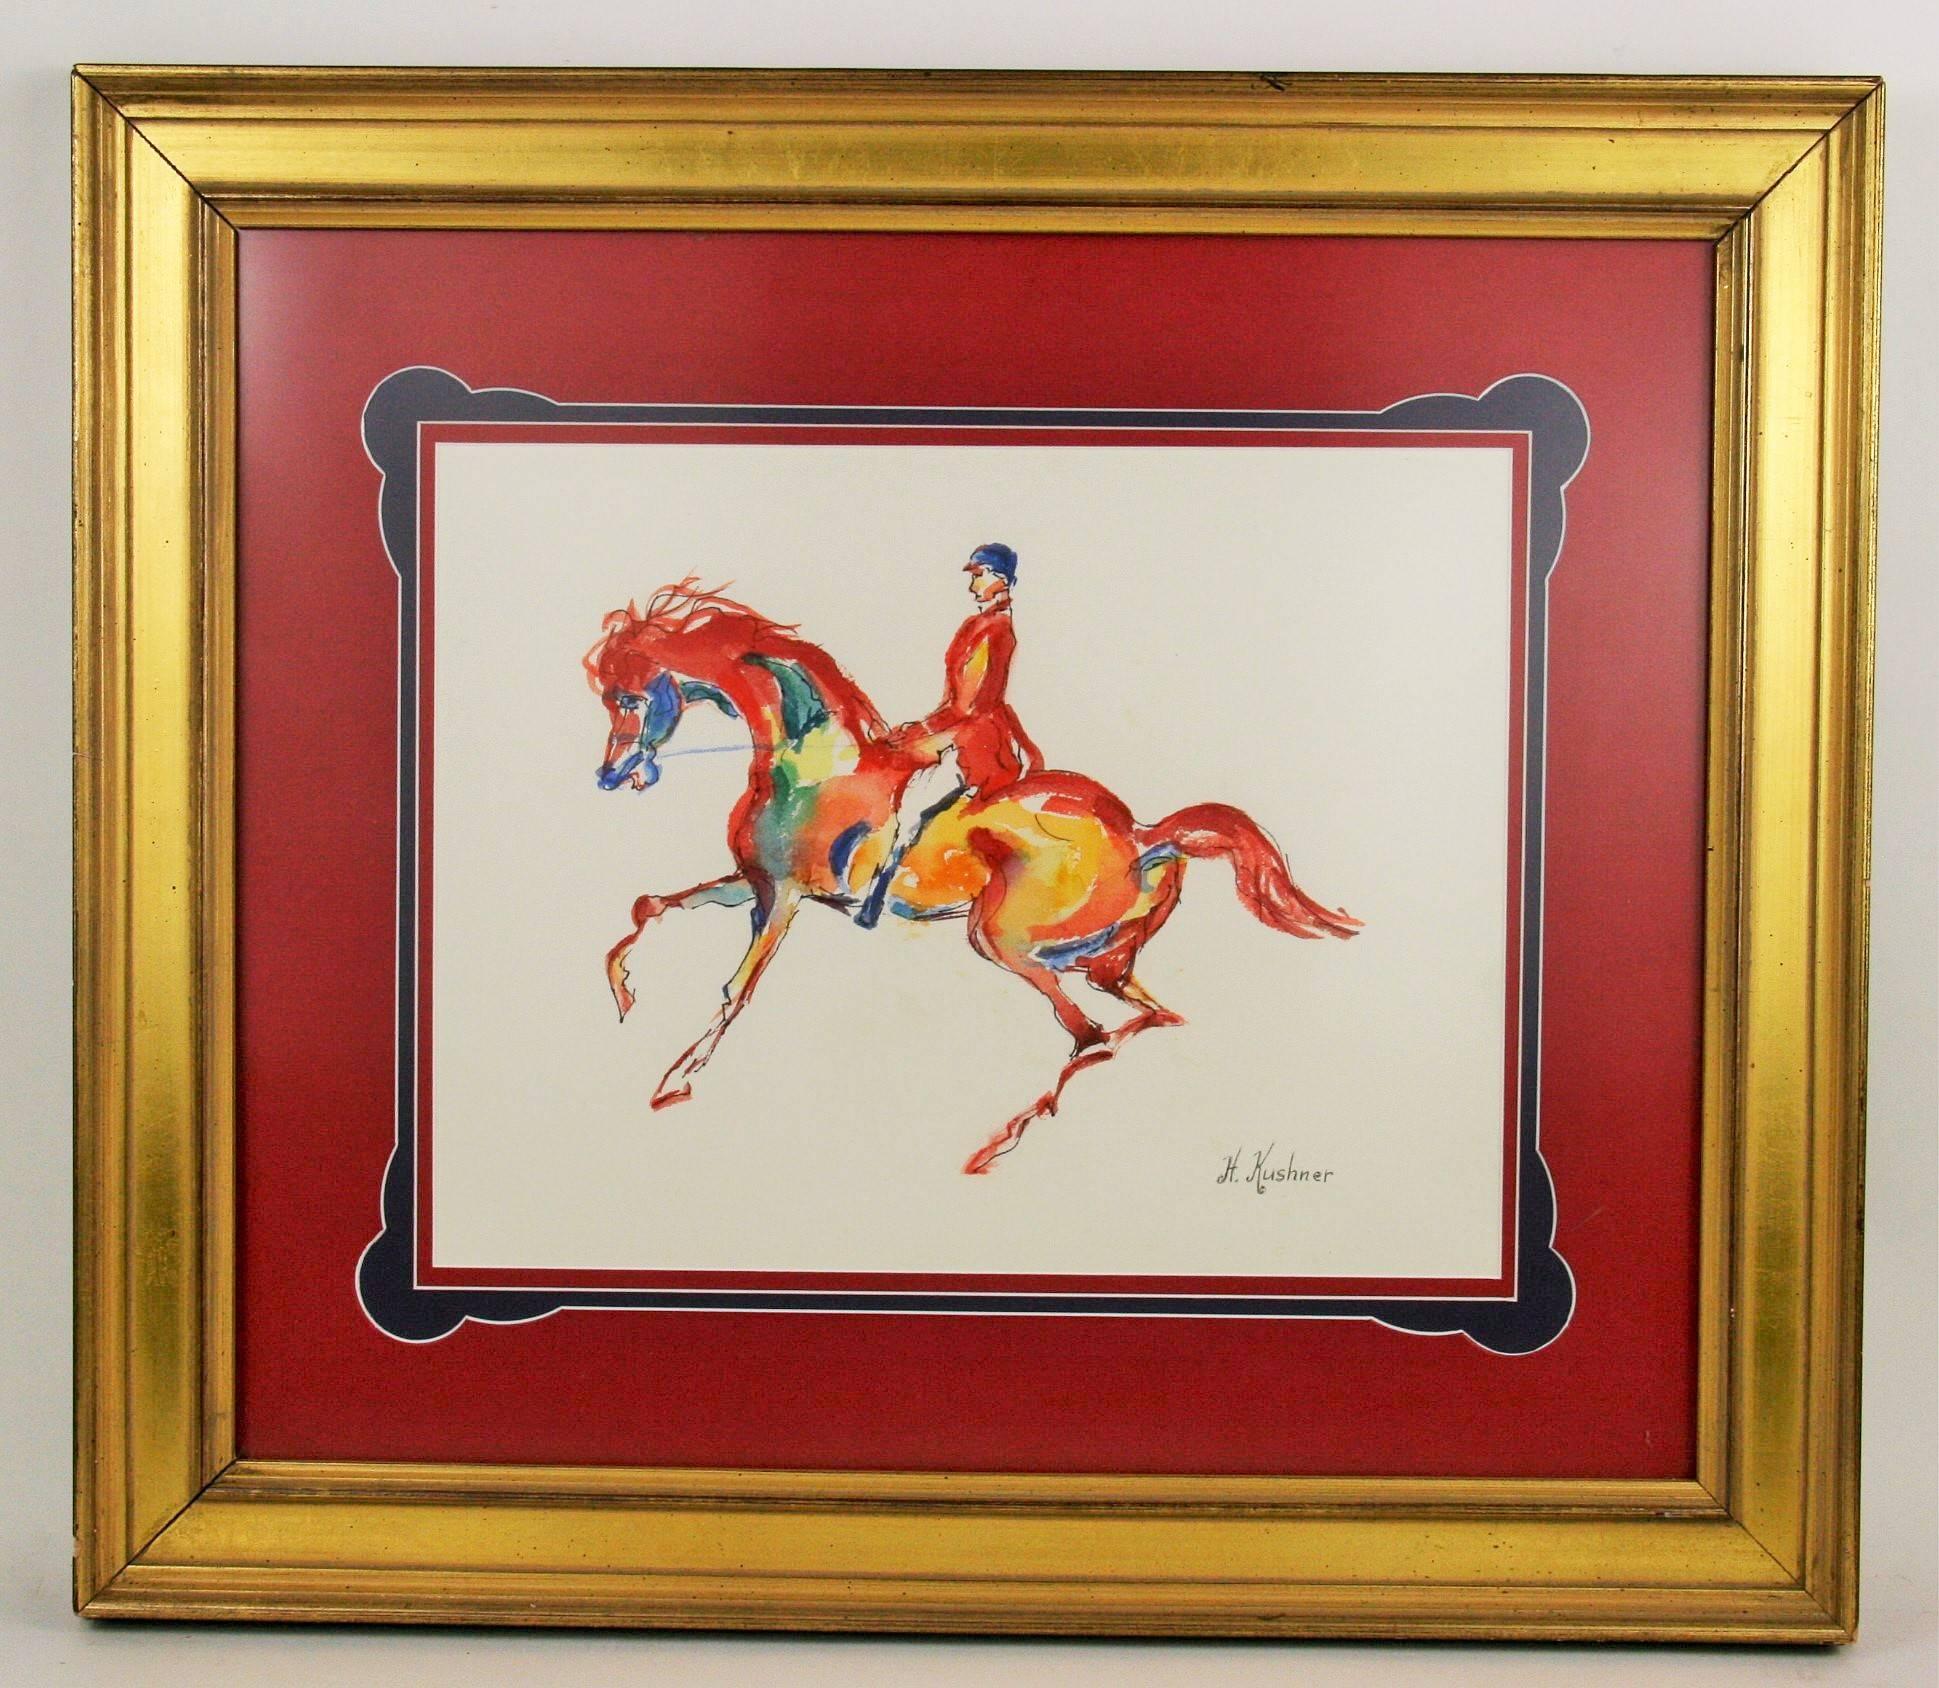 H. Krushner Animal Painting - Surreal  Red Horse Figural  Equestrian Painting 